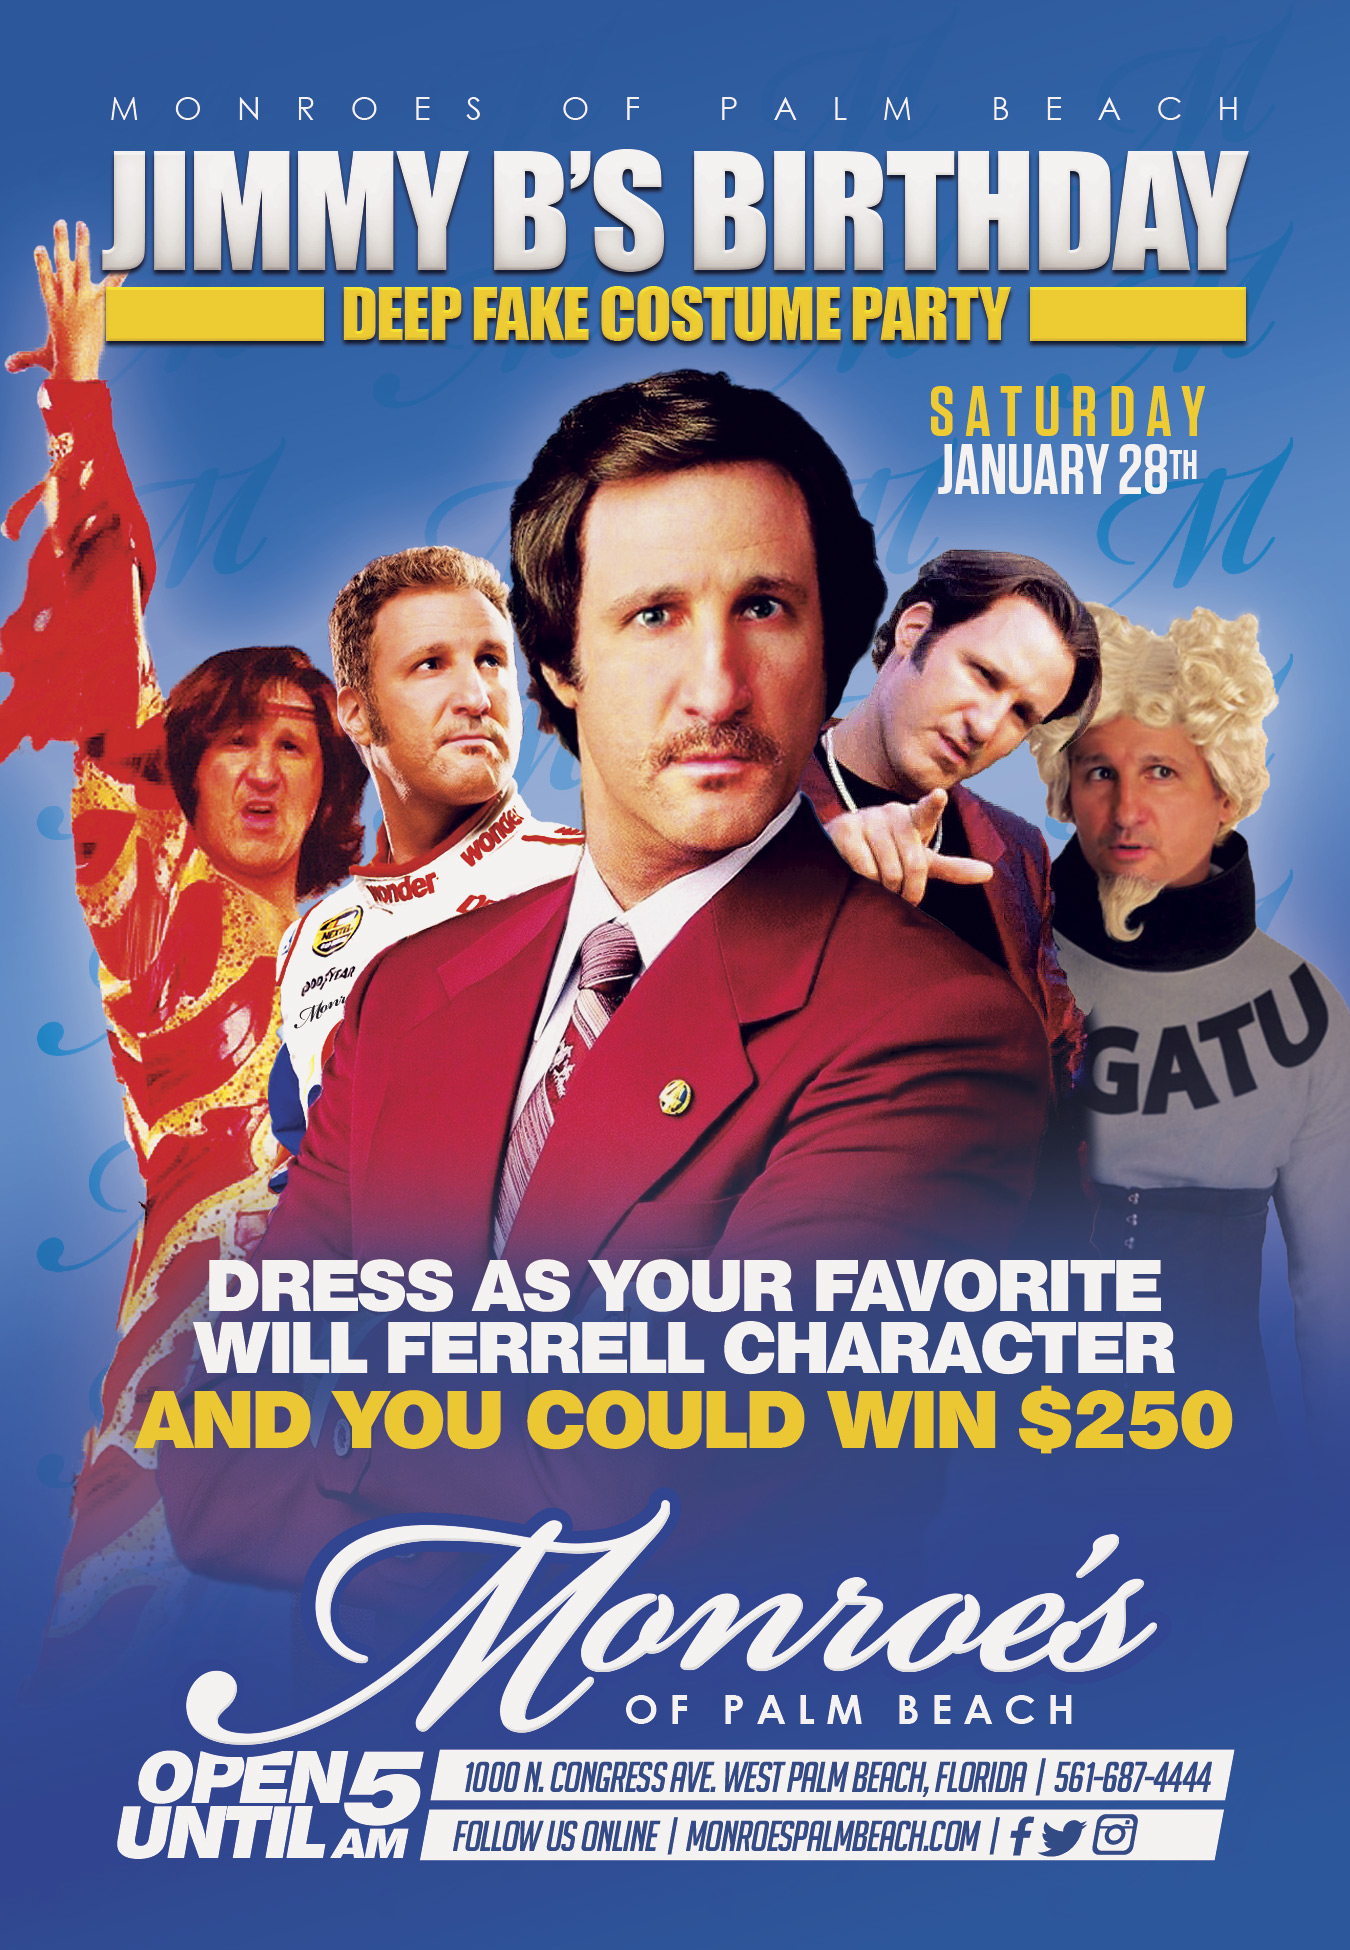 Jimmy B's Will Ferrell Deep Fake Costume Party Jan28th at Monroe's Pal Beach